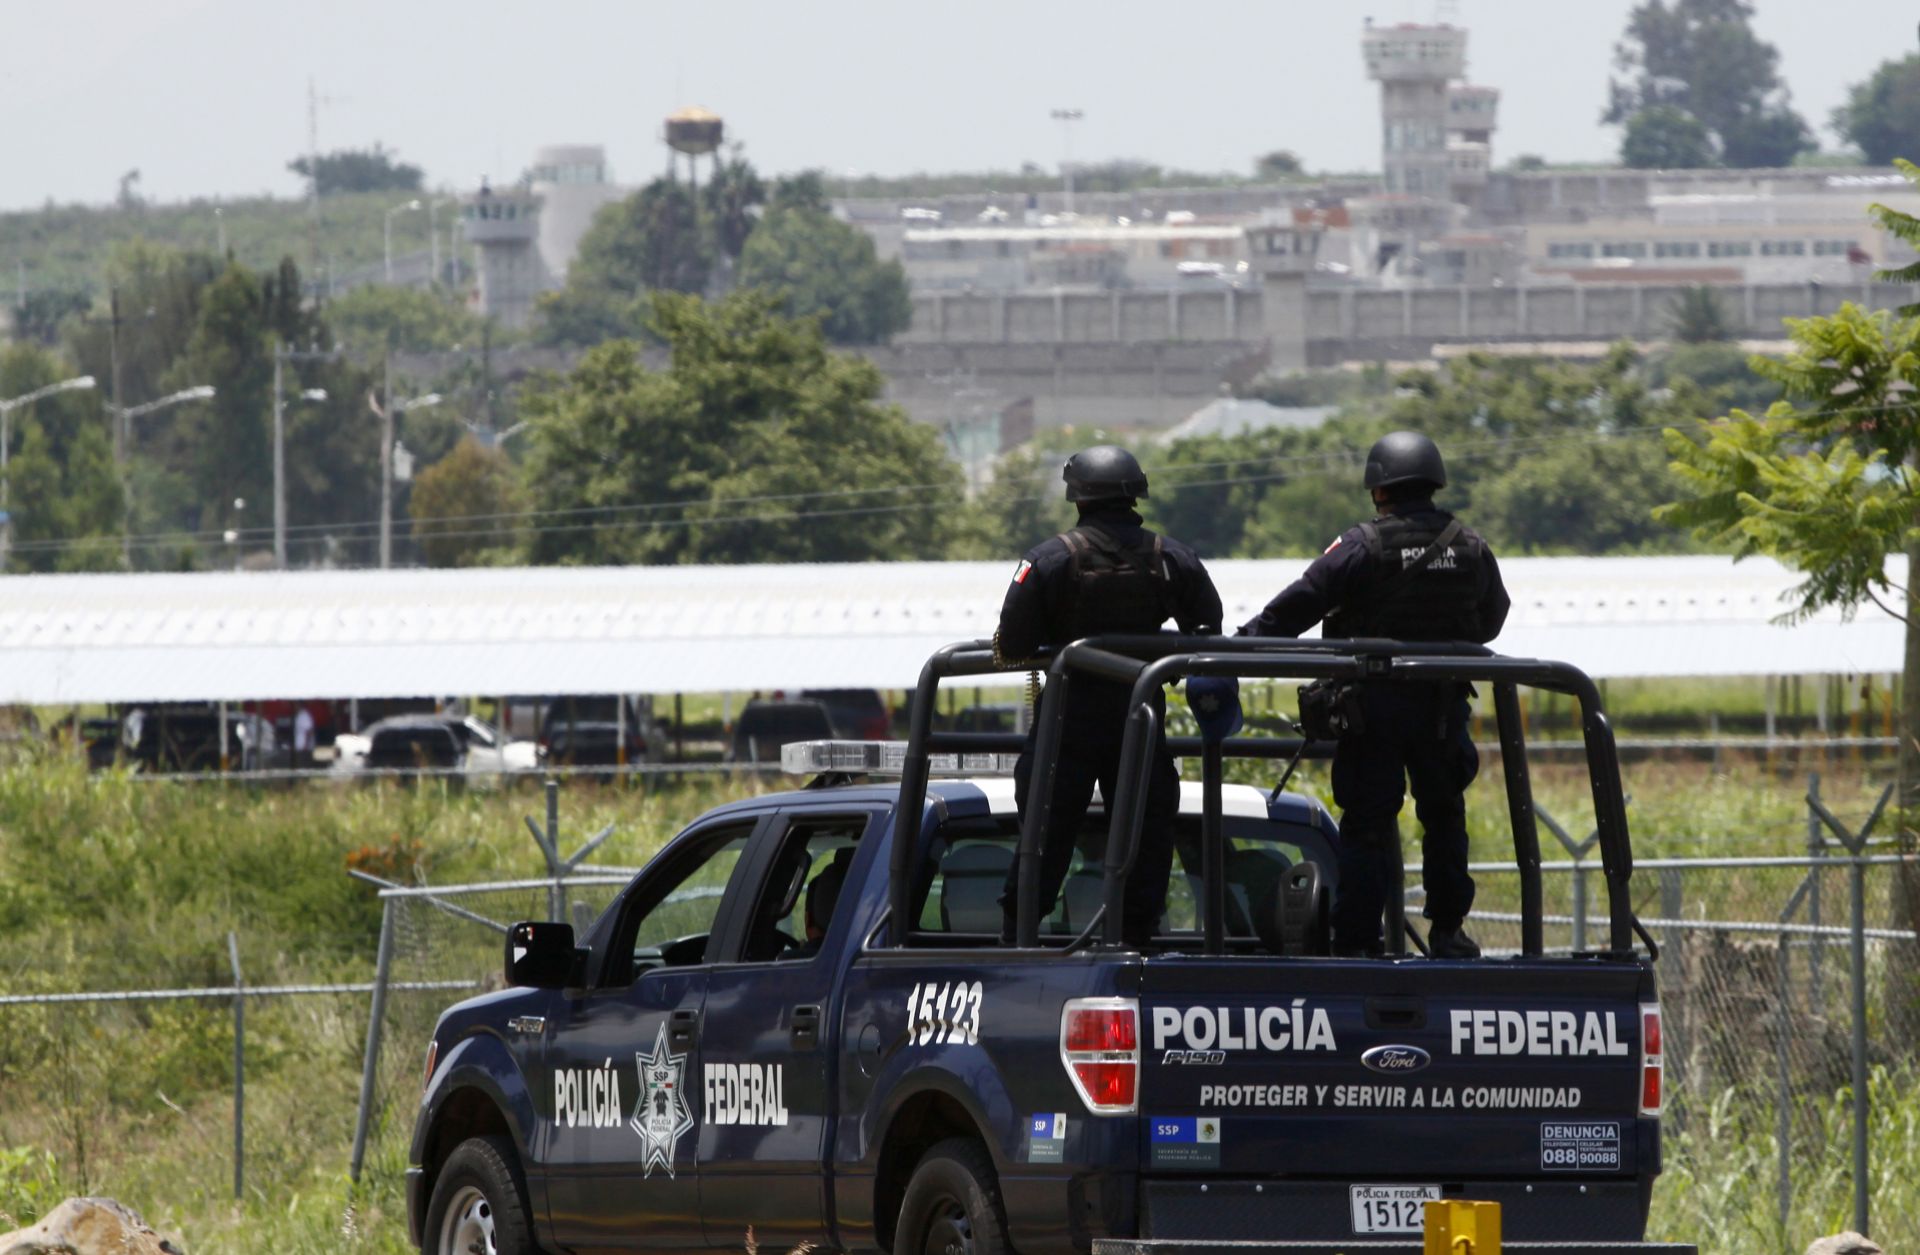 The Federal Police of Mexico patrol near the Puente Grande prison in Zapotlanejo, Jalisco, from which Rafael Caro Quintero was freed on Aug. 9, 2013.